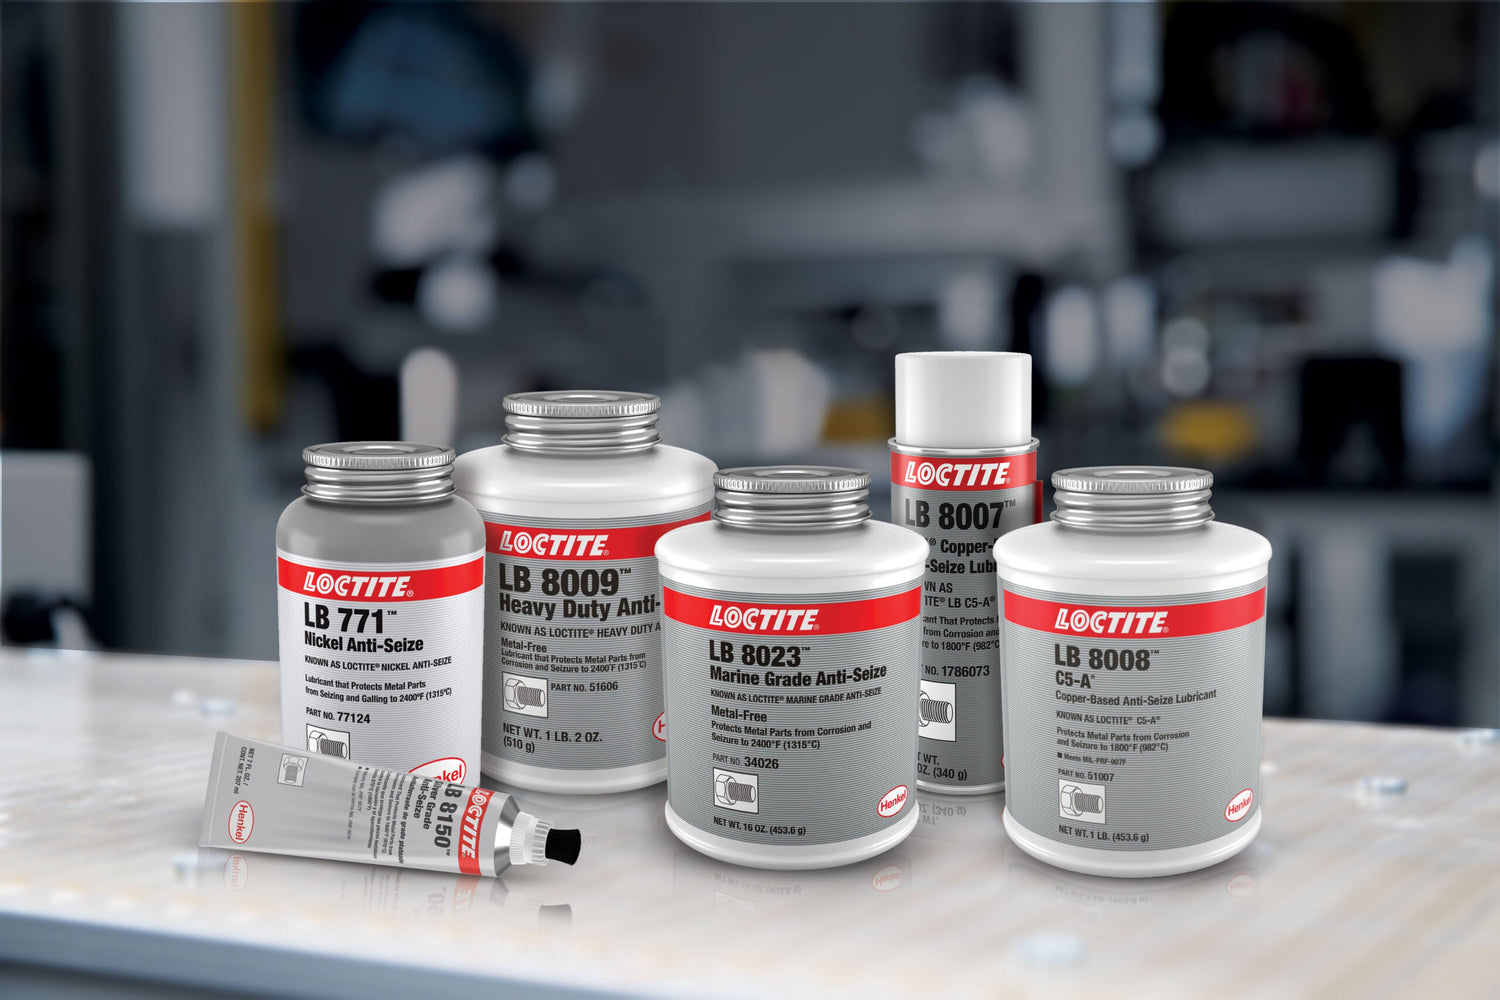 Loctite Anti-Seize: The Solution to Your Seizing and Galling Problems